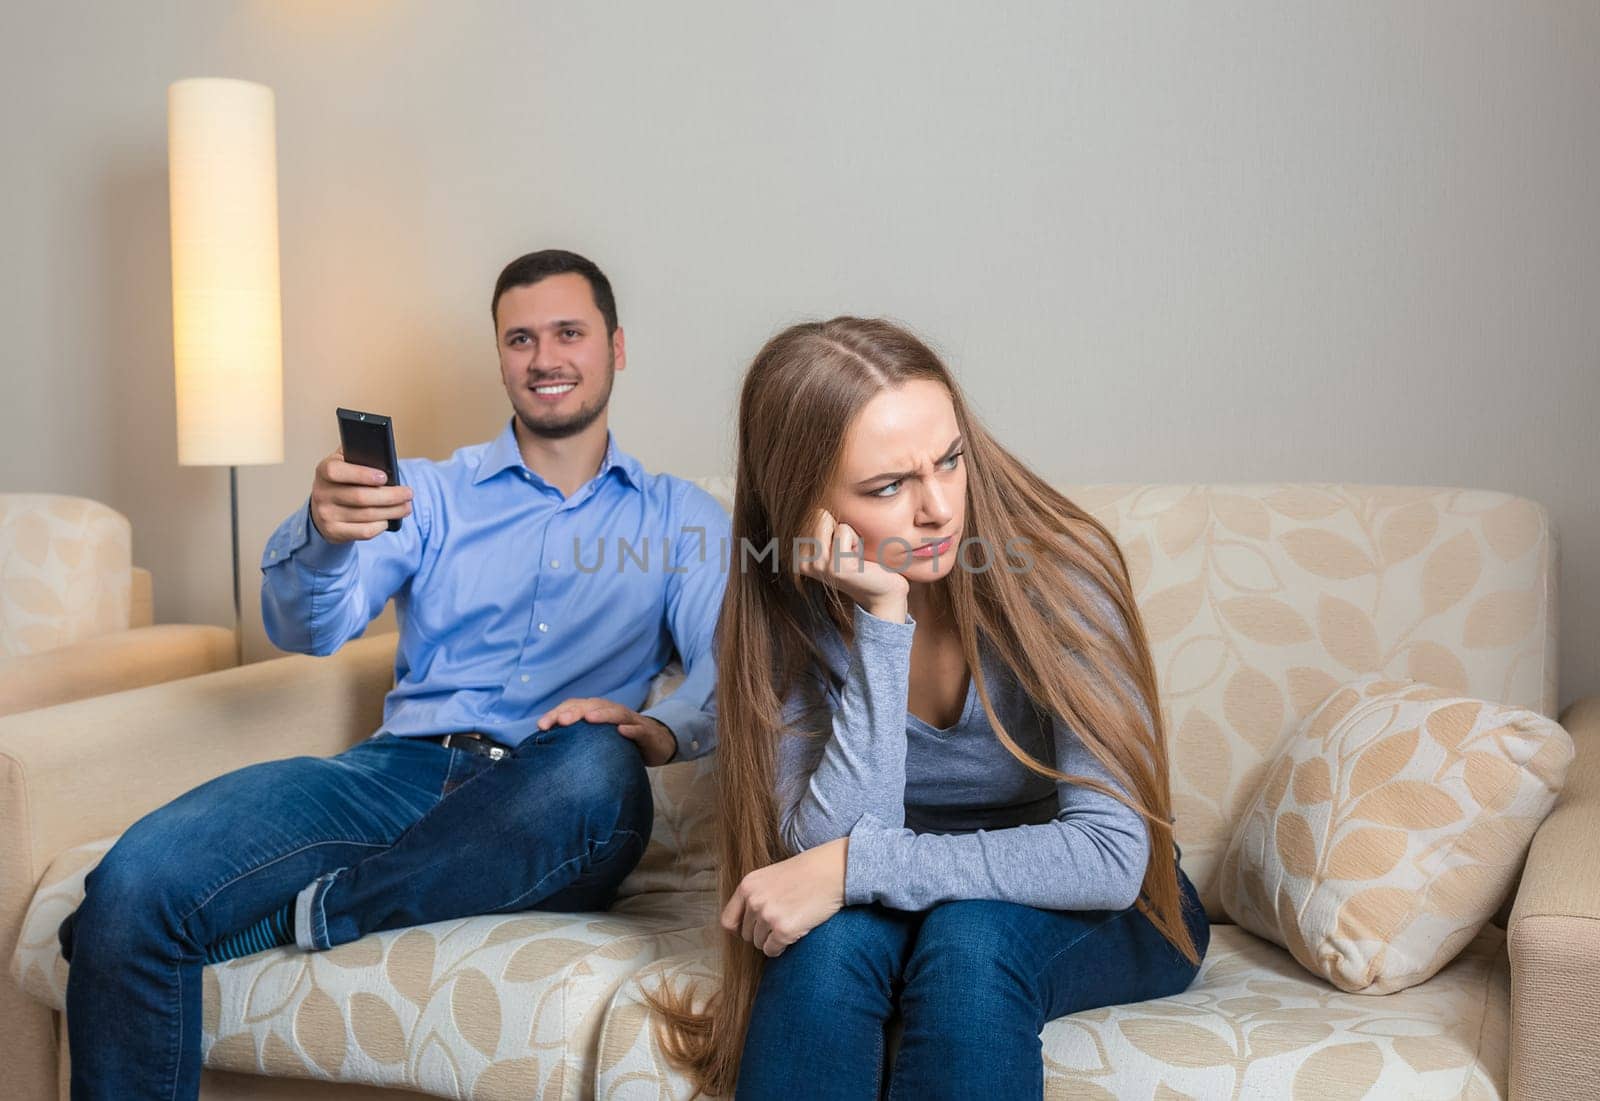 Portrait of couple sitting on sofa watching television. Image of men with remote control in hands and upset woman